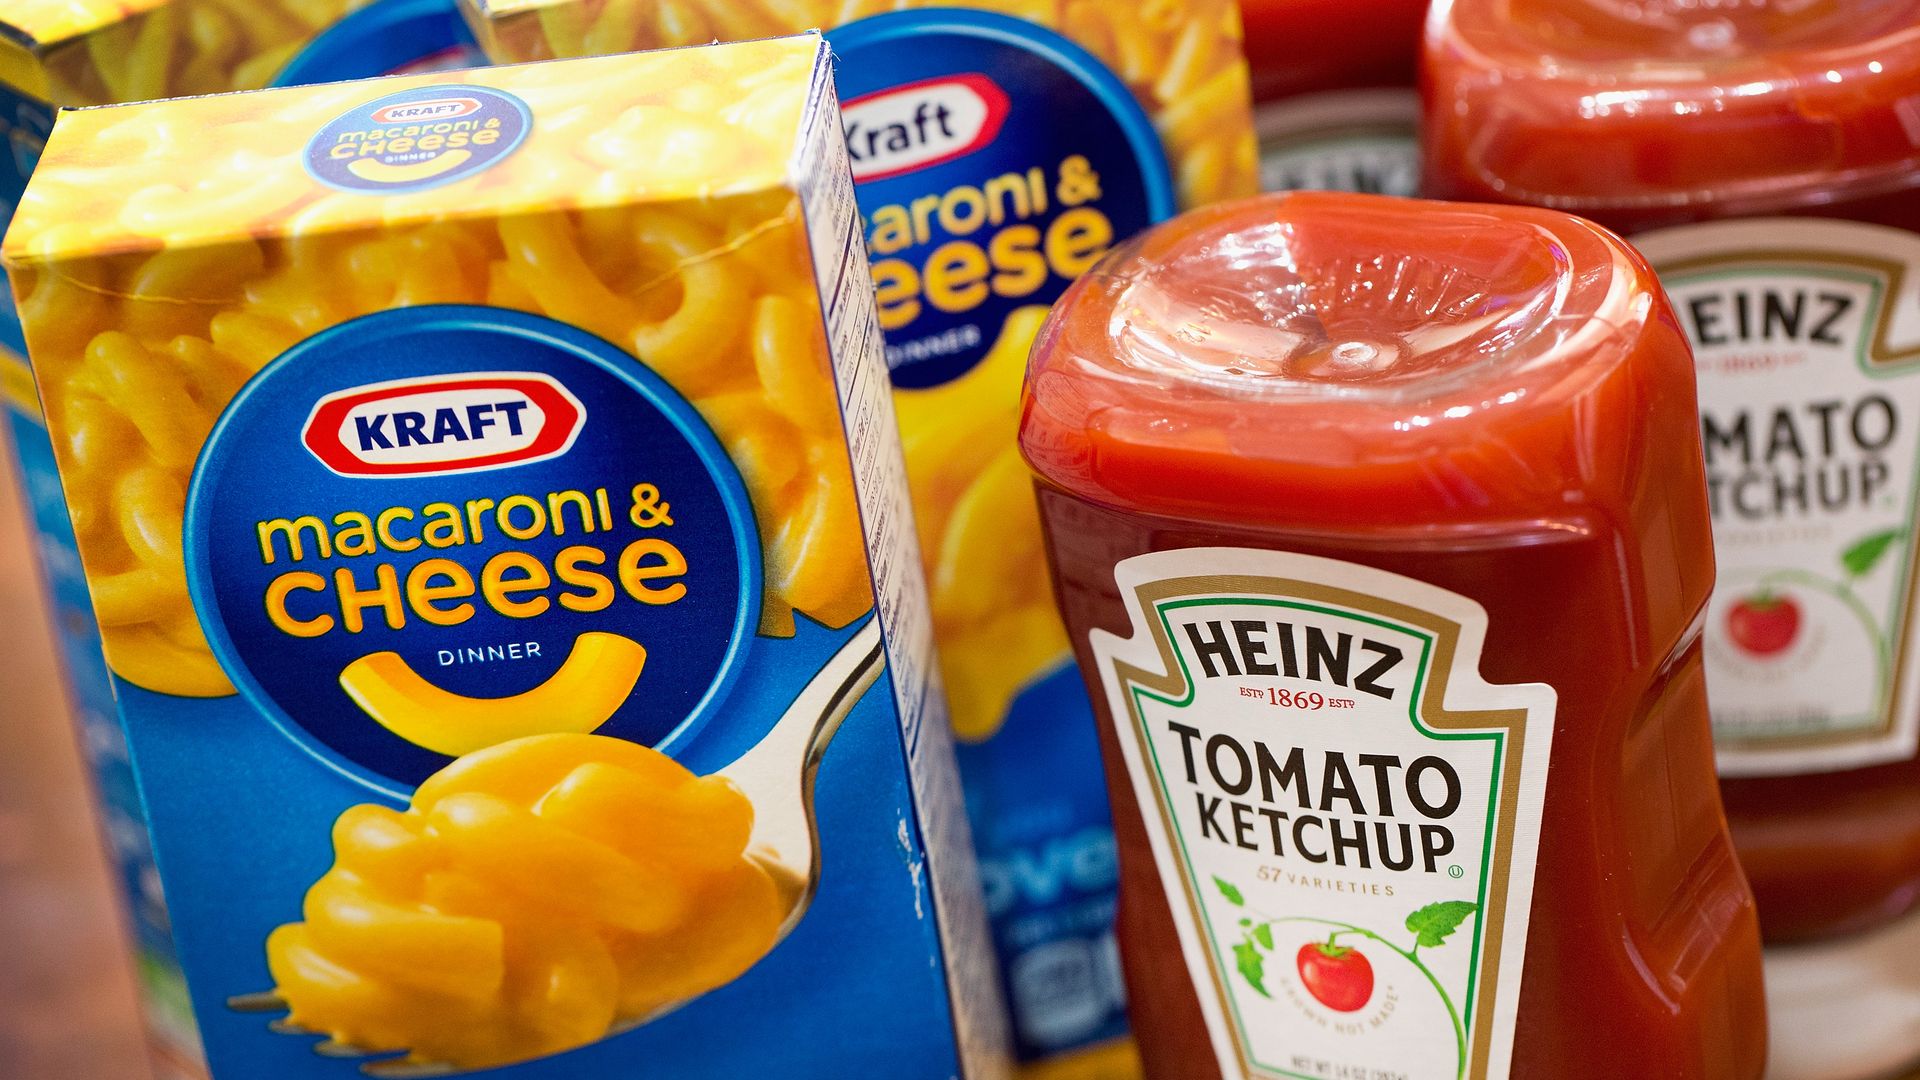 Kraft and Heinz products.